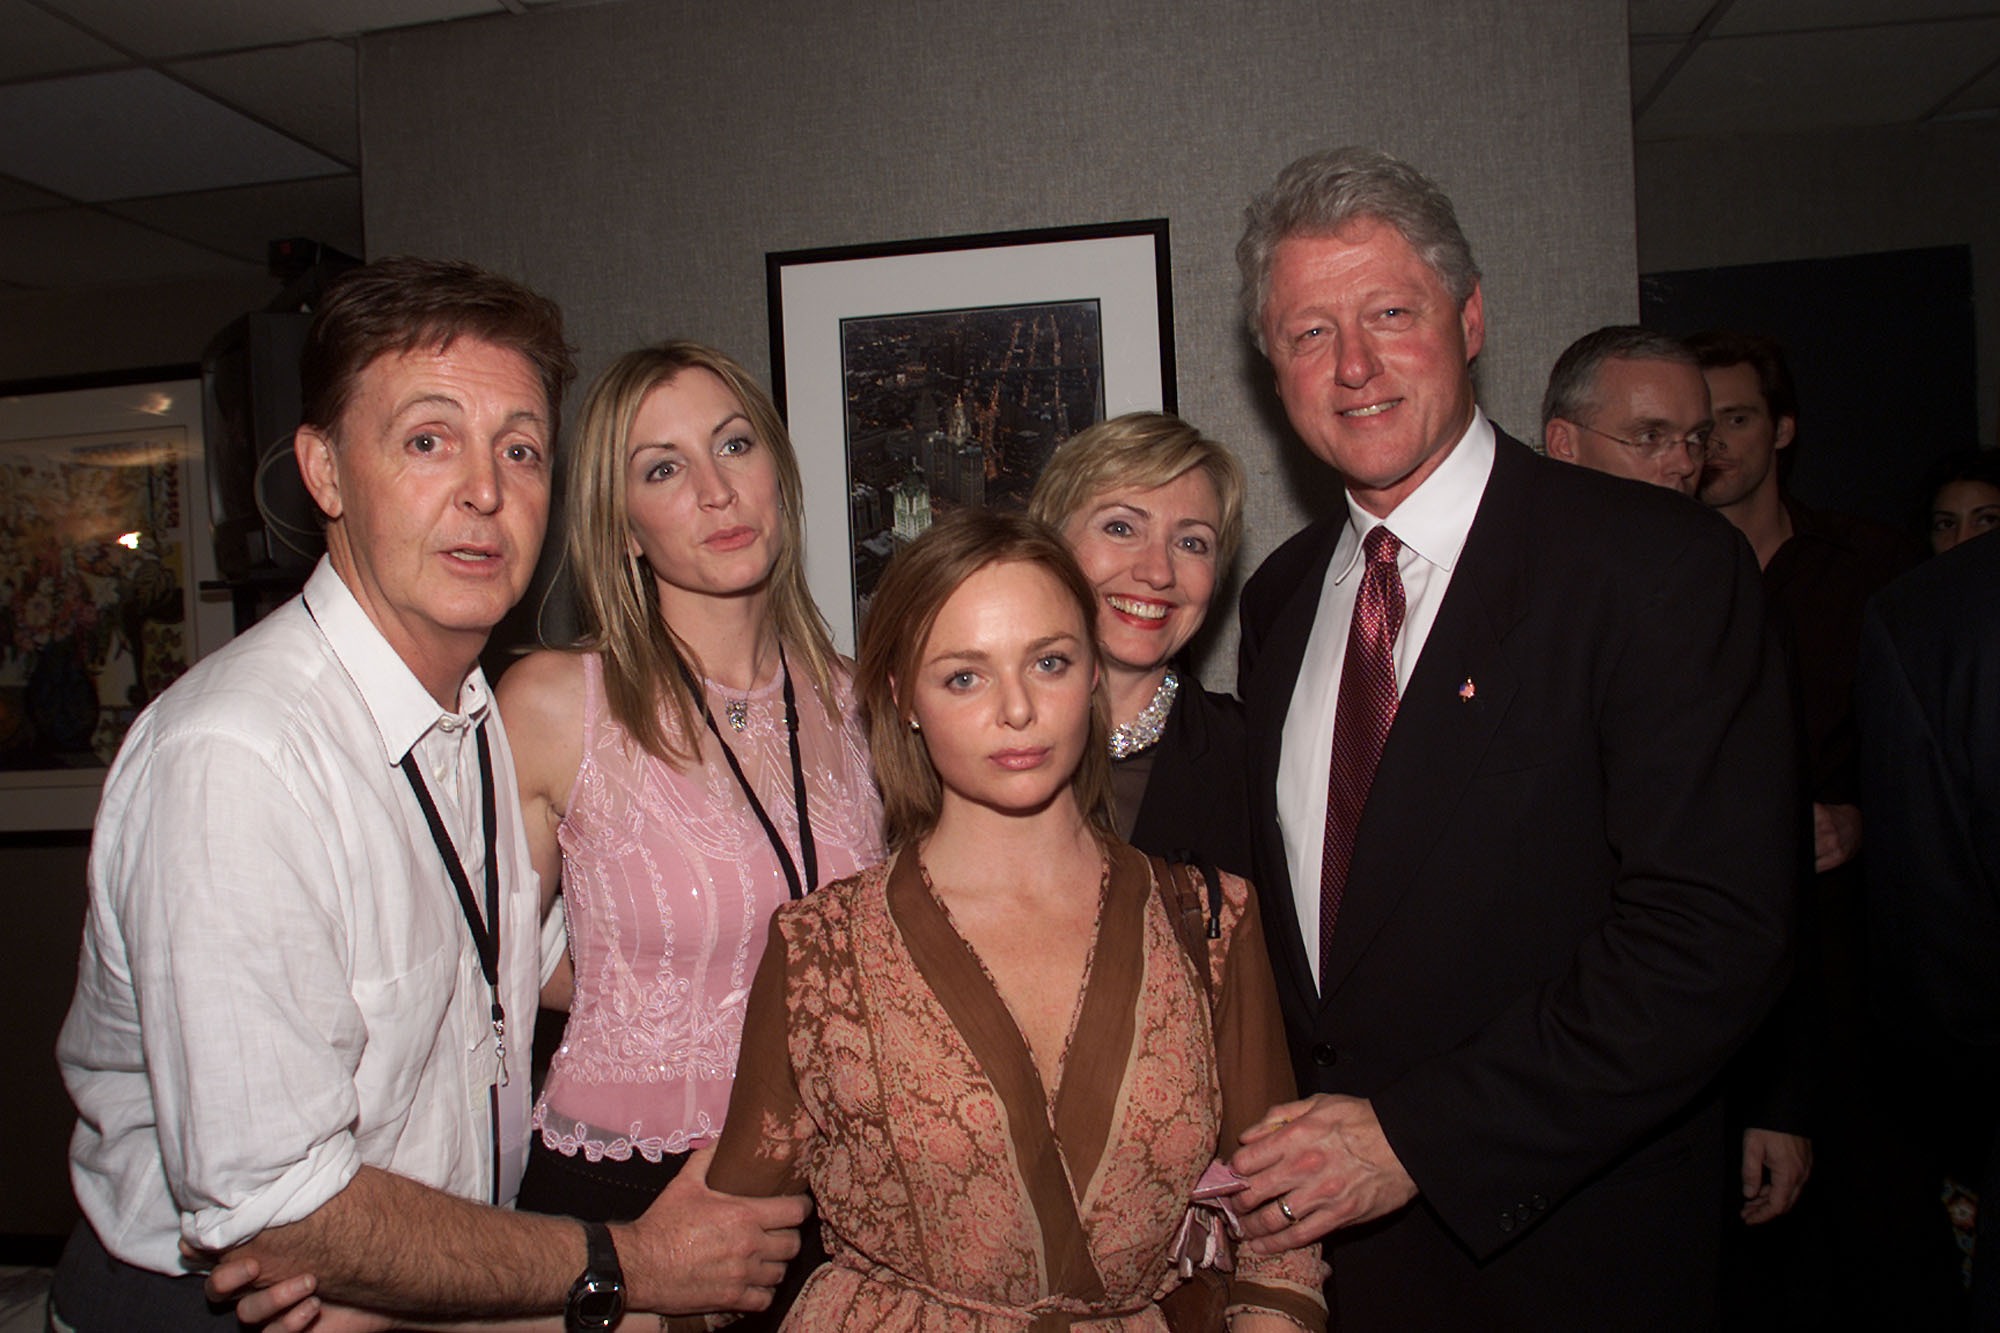 Heather Mills, Stella McCartney and Hillary and Bill Clinton in New York in 2001 | Source: Getty Images